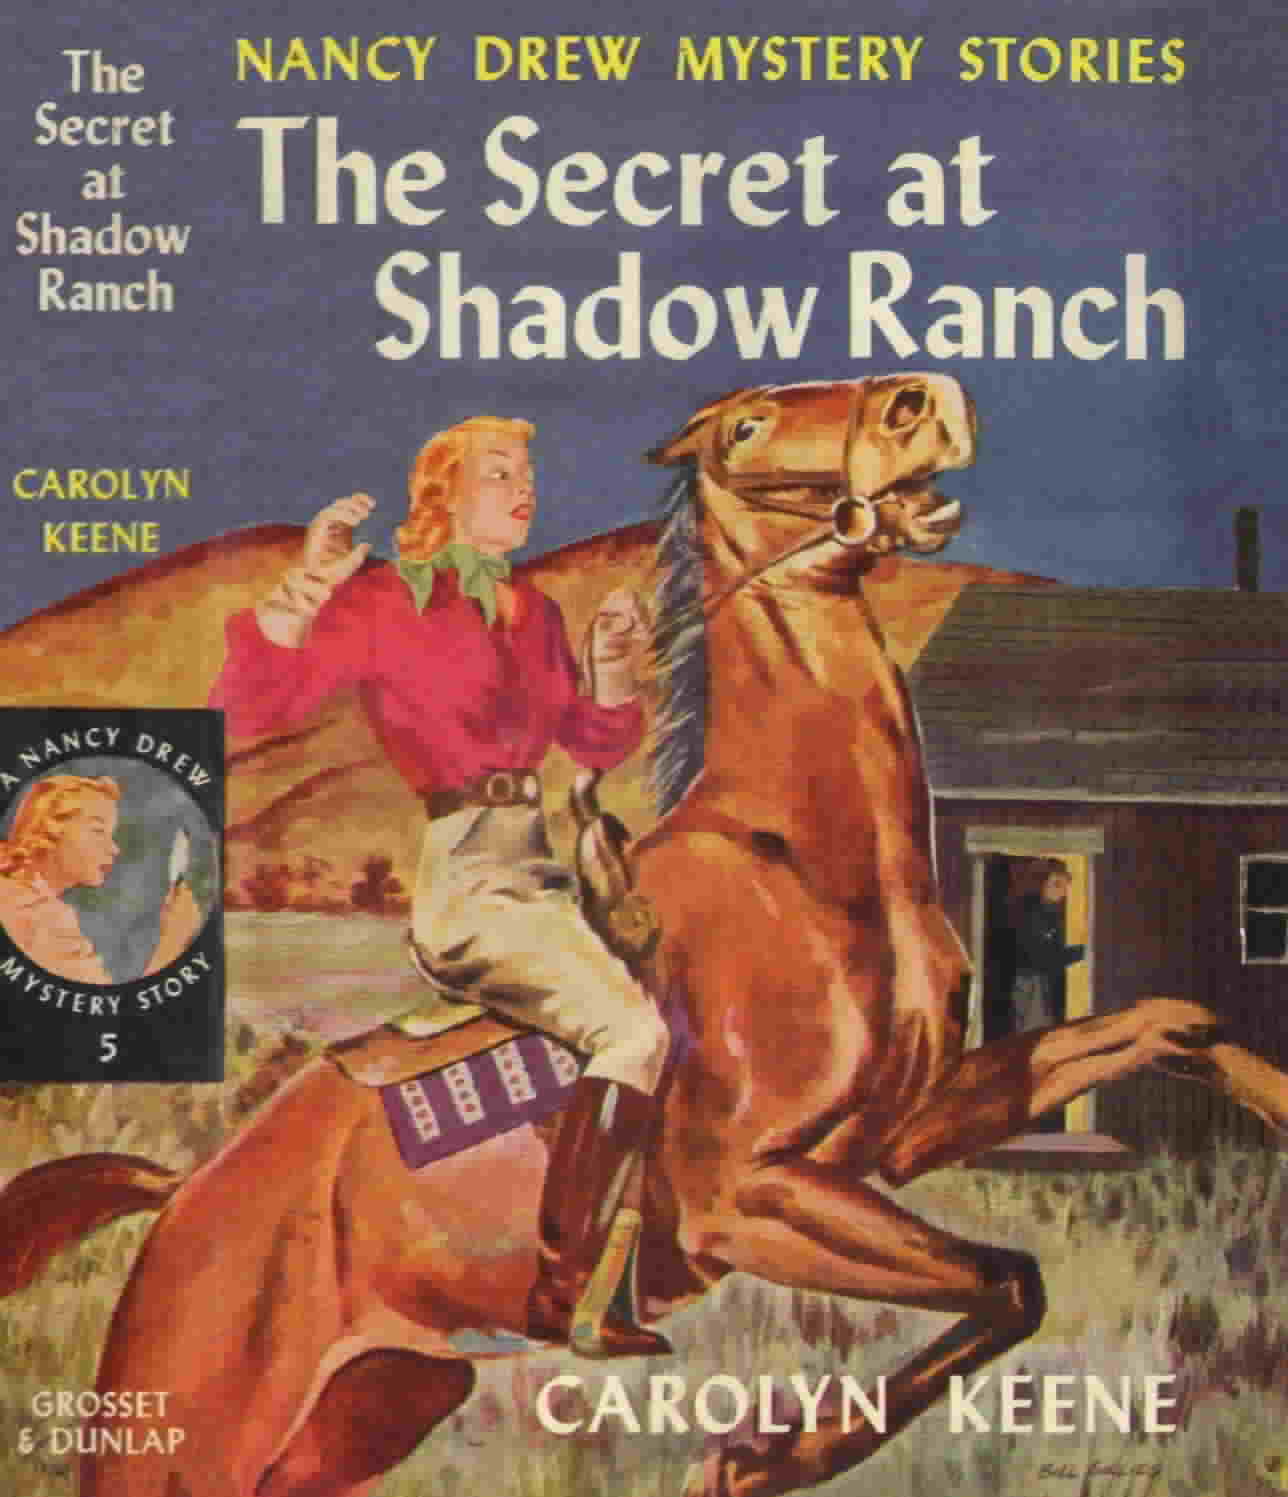 The Secret at Shadow Ranch